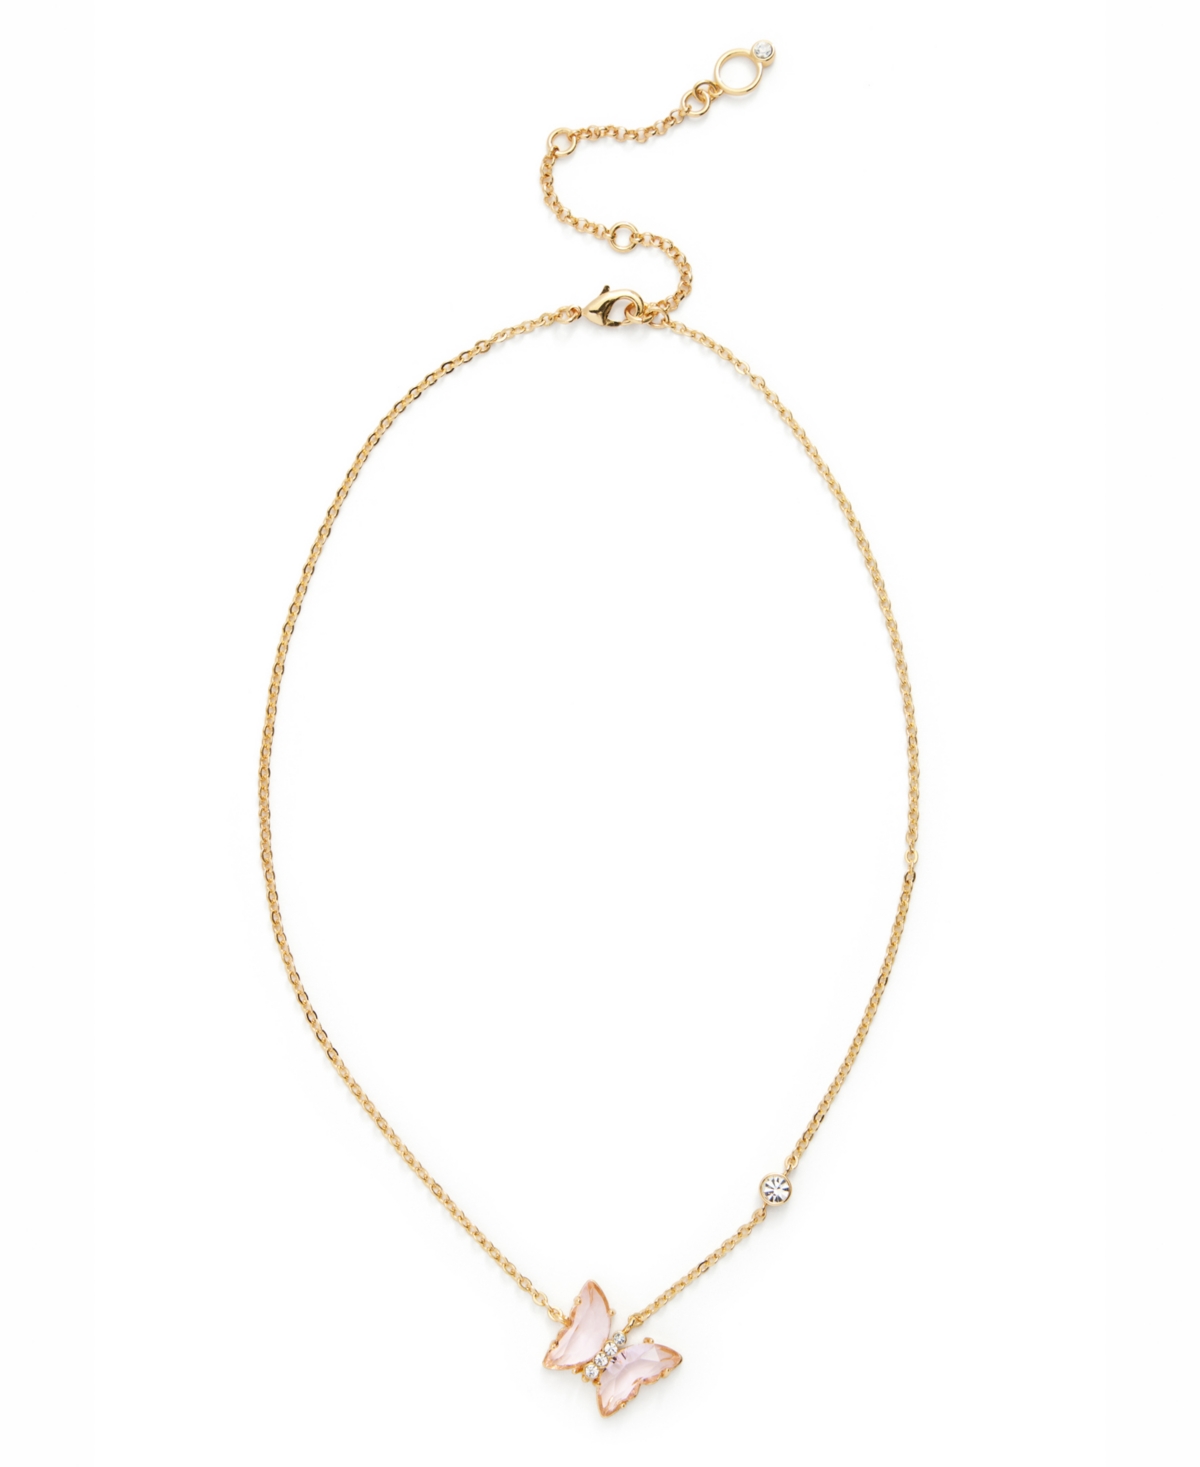 Faux Stone Butterfly Delicate Pendant Necklace - Pink, Gold